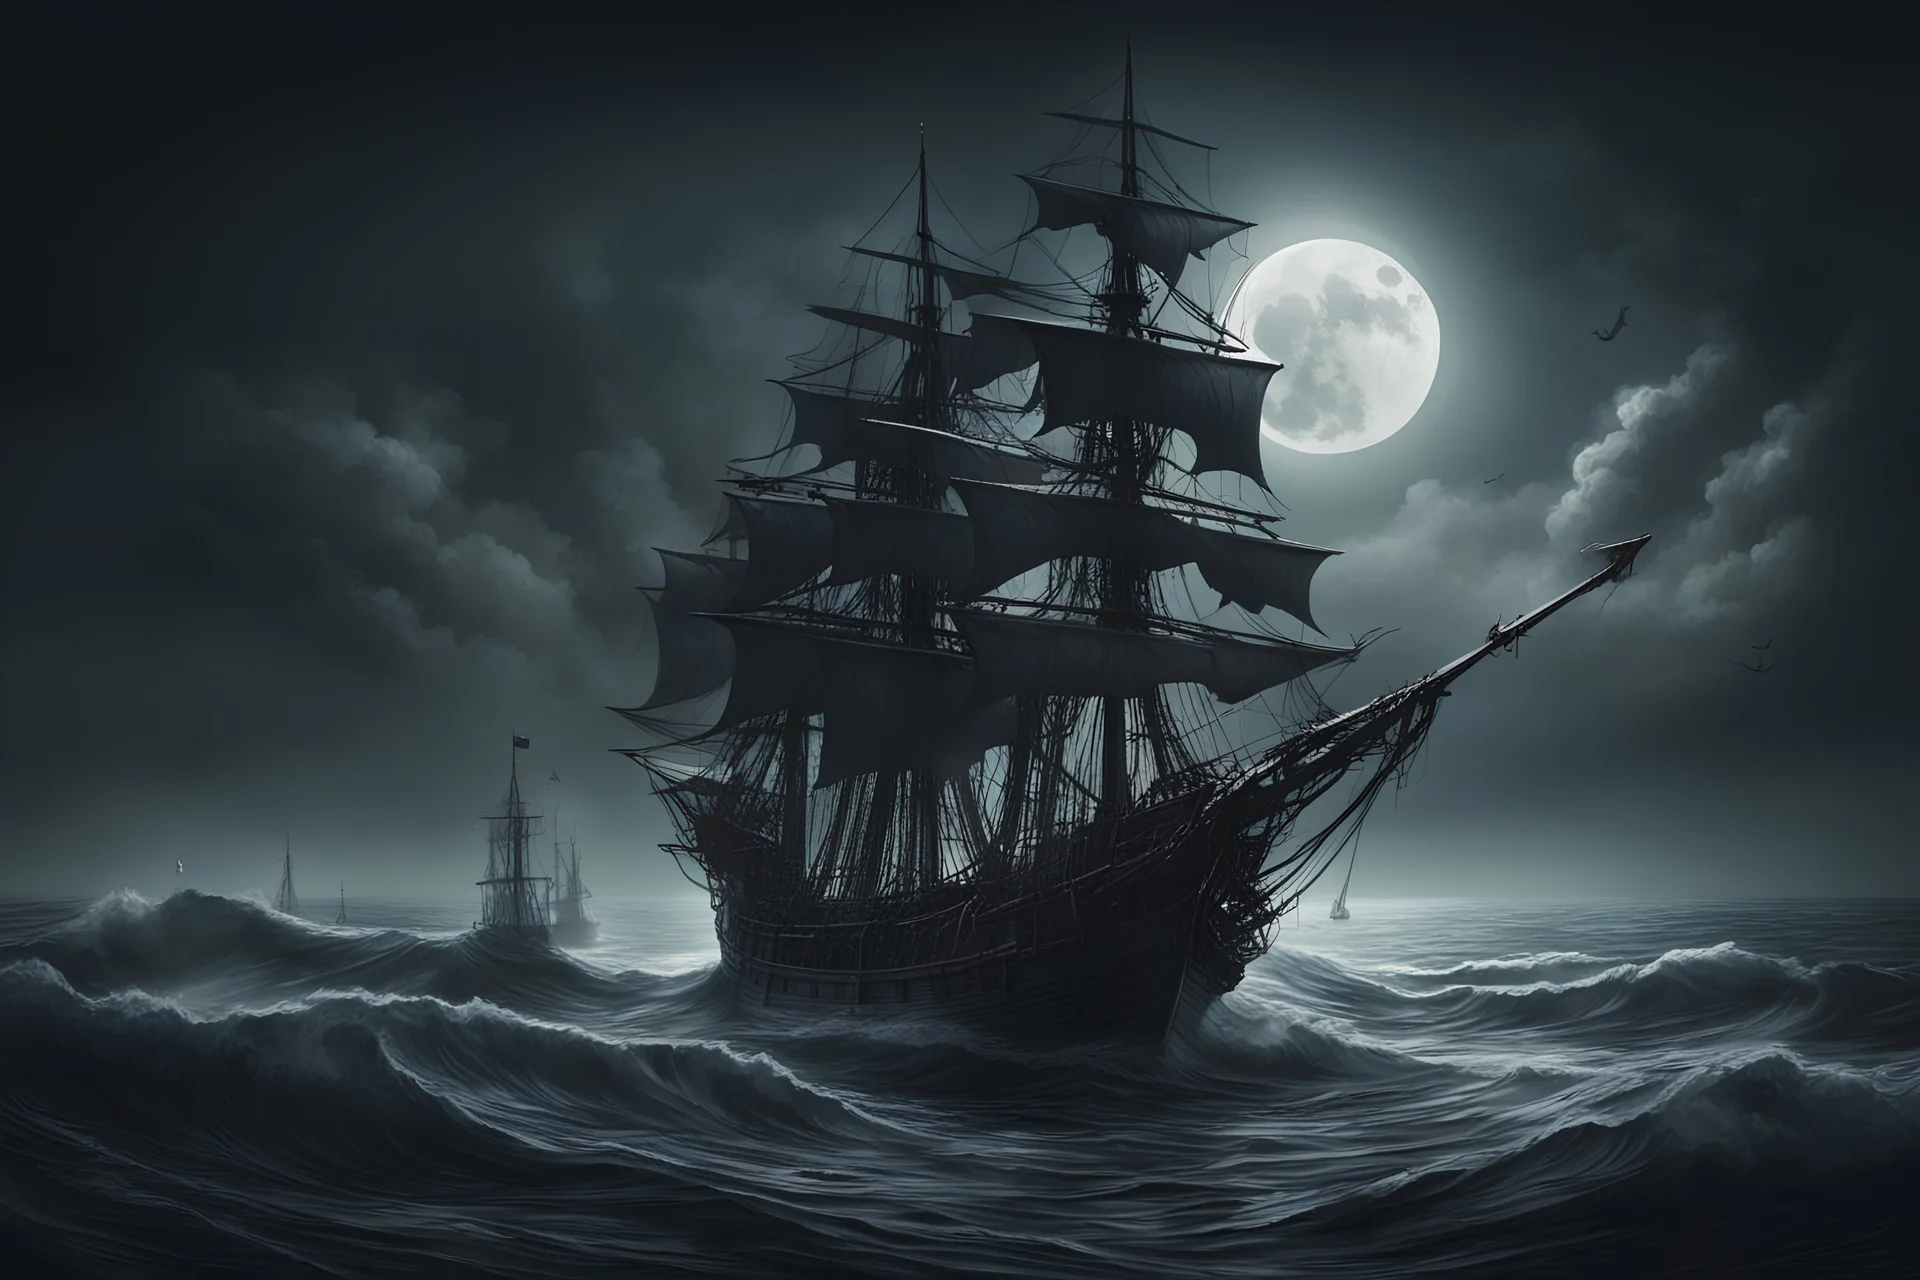 Open still sea with gentle waves, tiny moon and a big pirate cursed ghost-ship with high masts, taut rigging approaching. Dark and evil atmosphere. Ultra realistic